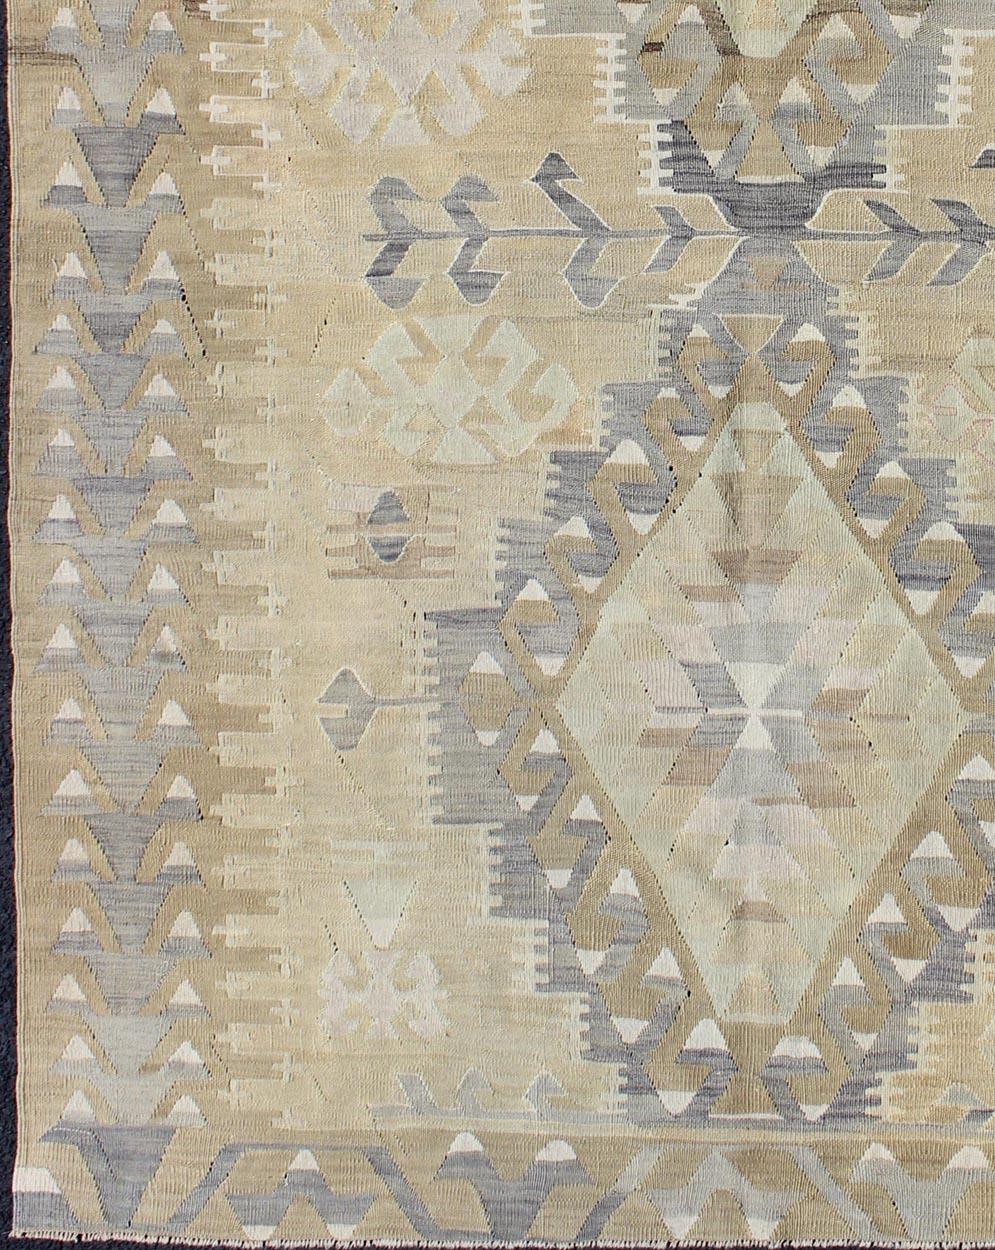 Hand-Woven Vintage Tribal Kilim with Geometric Design in Taupe, Honey, Lavender, Gray & Tan For Sale